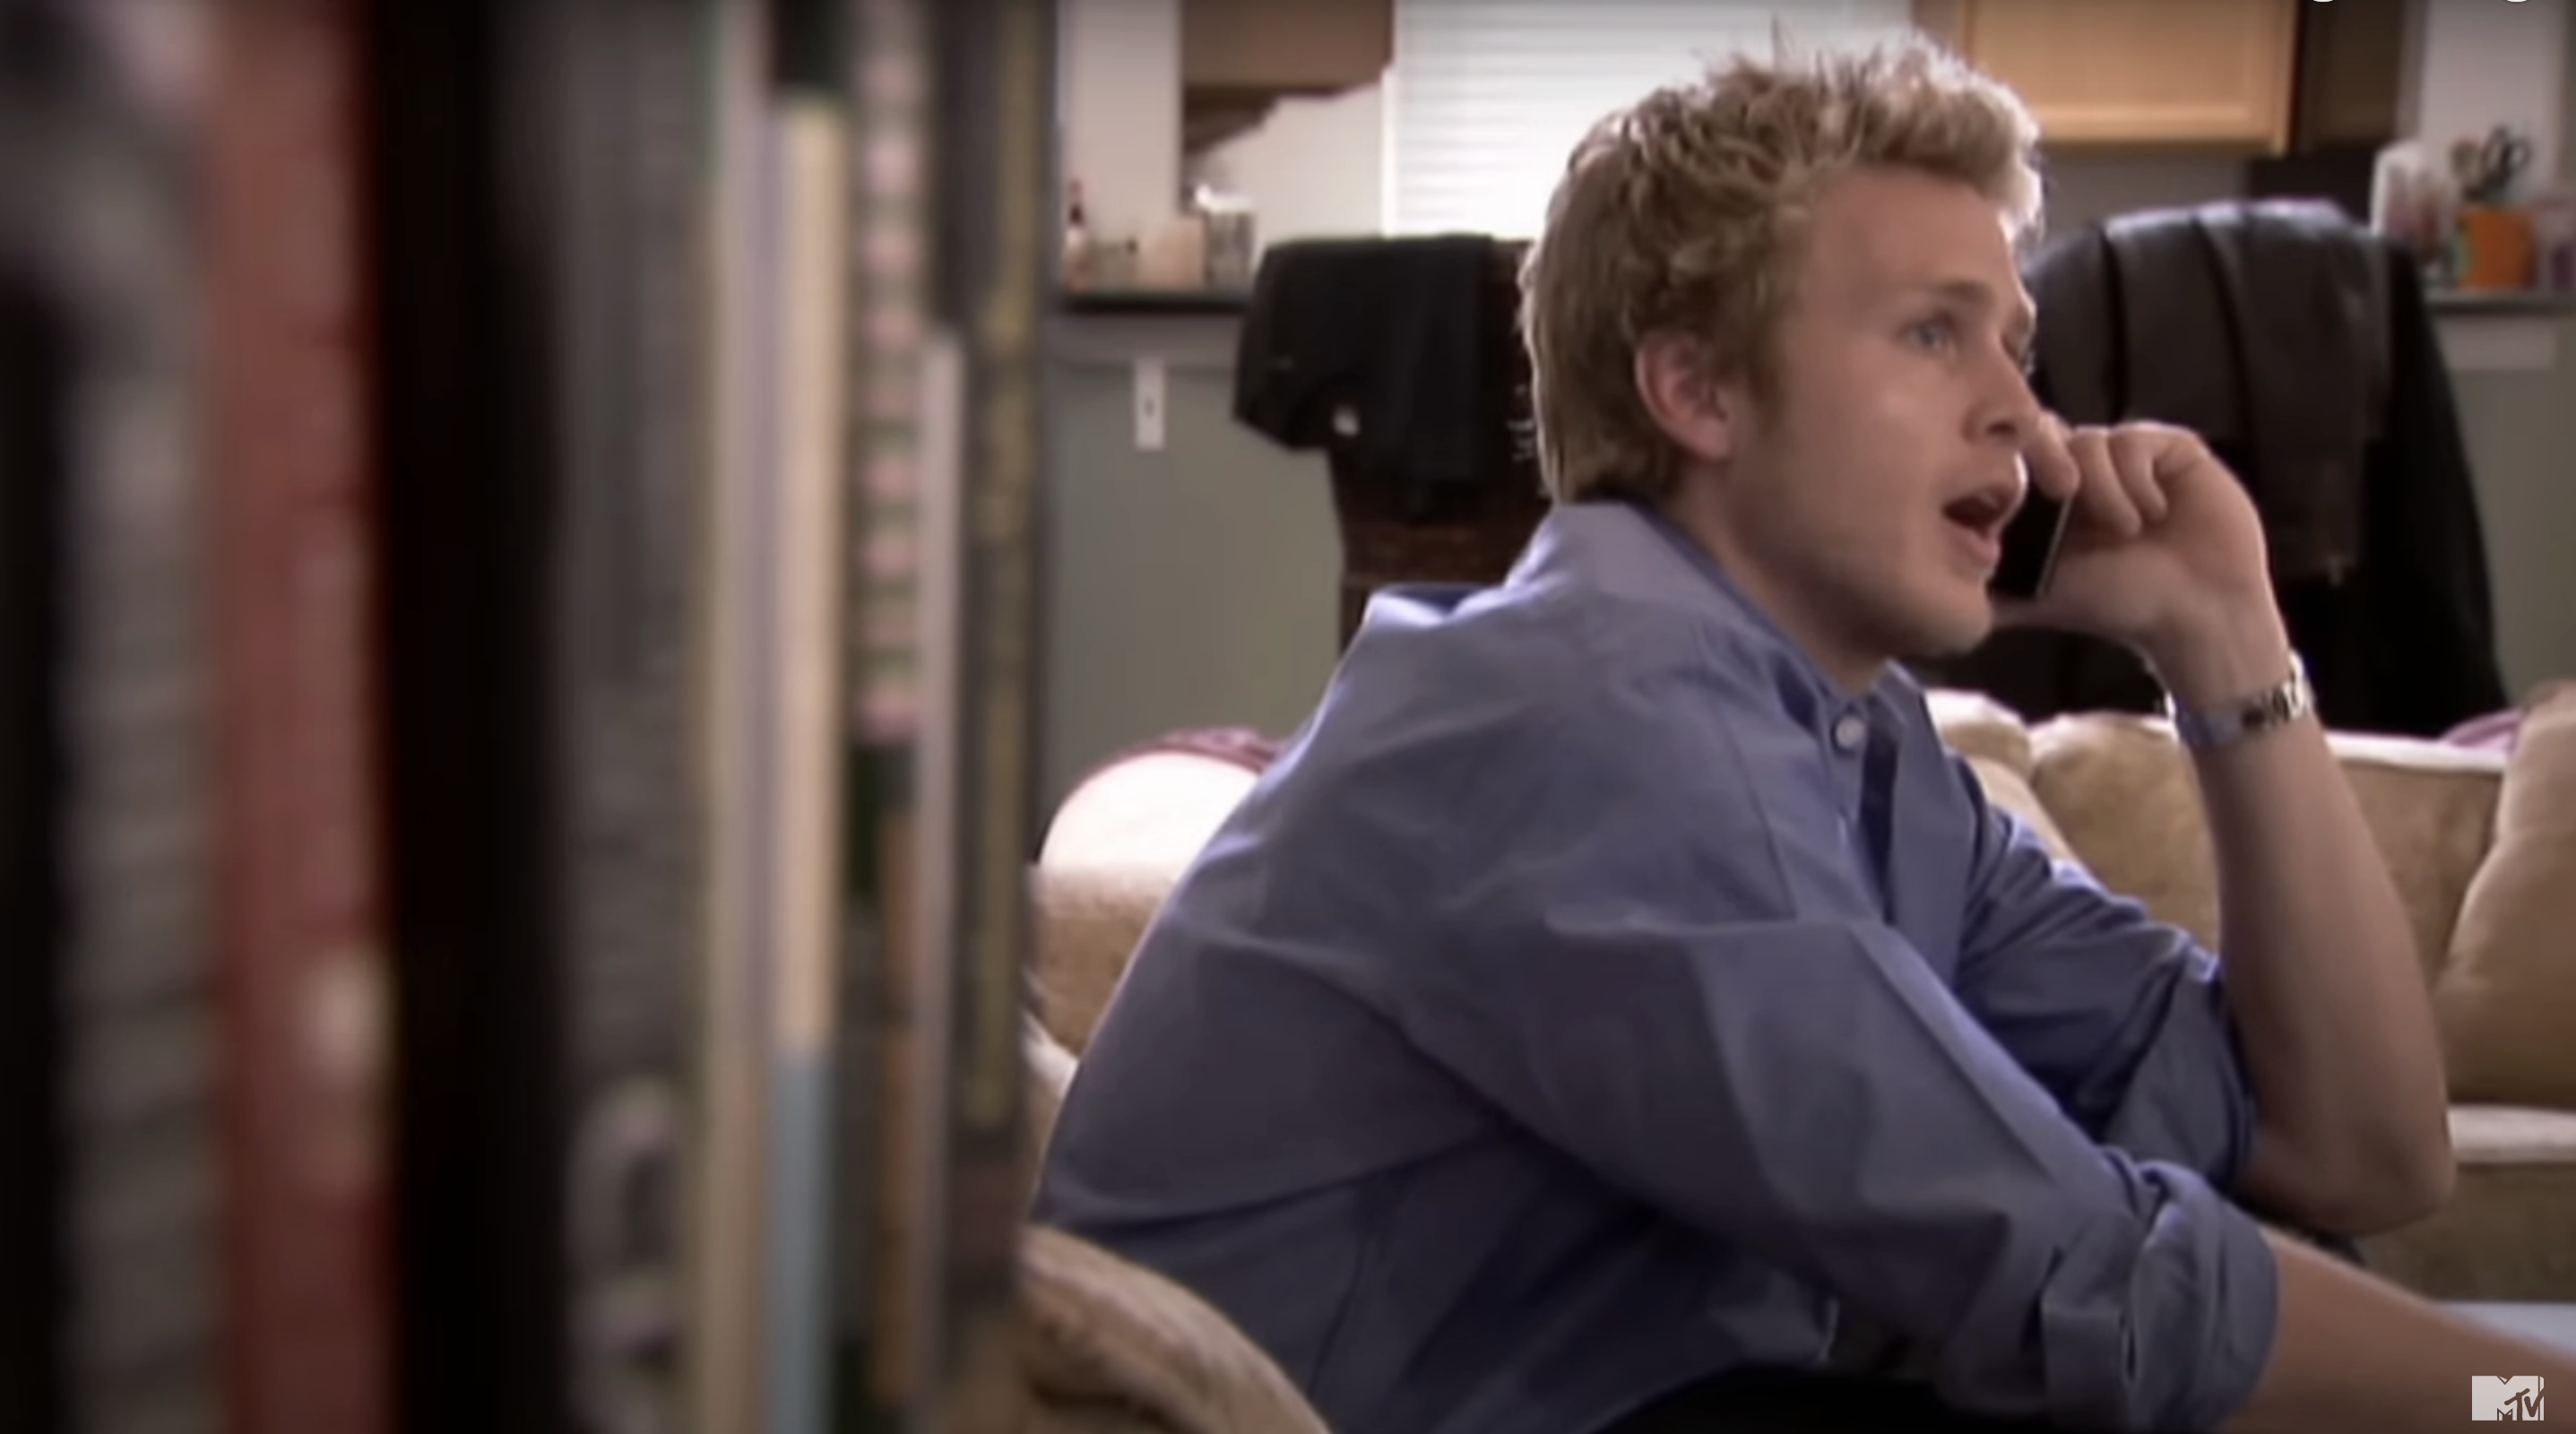 Spencer sitting on a couch talking on the phone, appearing surprised, in a casual setting